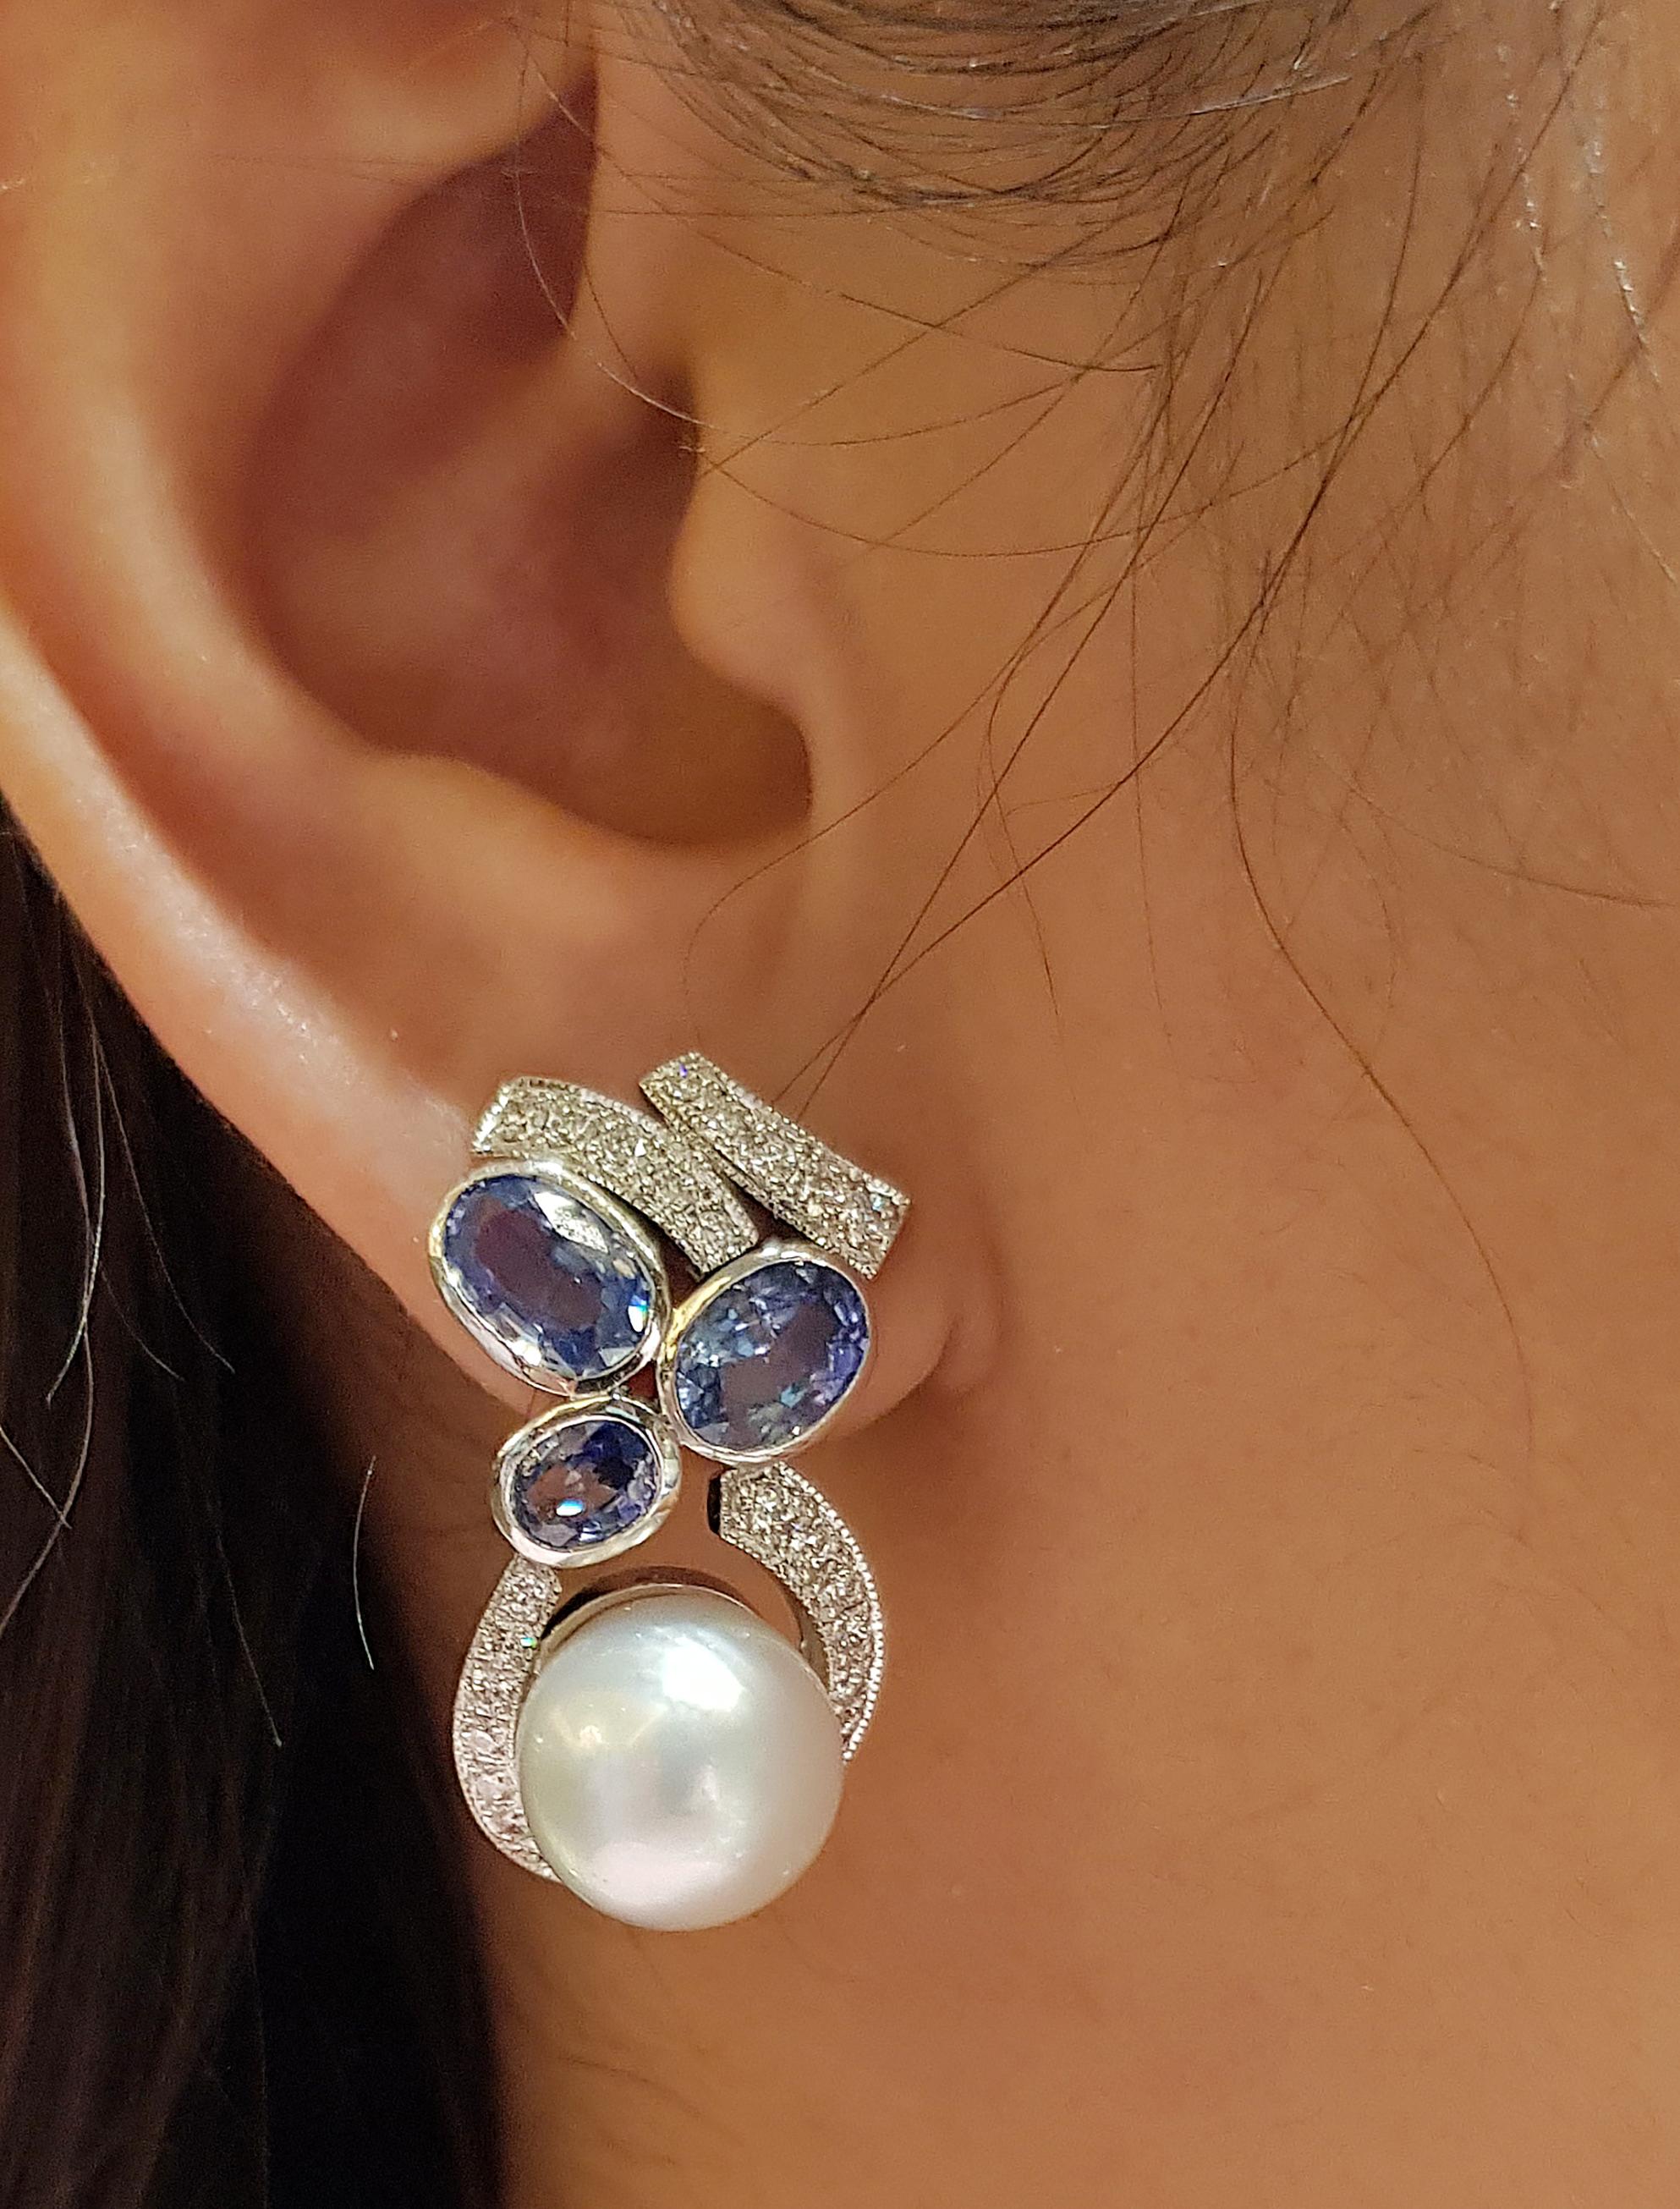 South Sea Pearl and Blue Sapphire 6.05 carats with Diamond 0.87 carat Earrings set in 18 Karat White Gold Settings

Width:  1.1 cm 
Length: 3.0 cm
Total Weight: 17.55 grams

